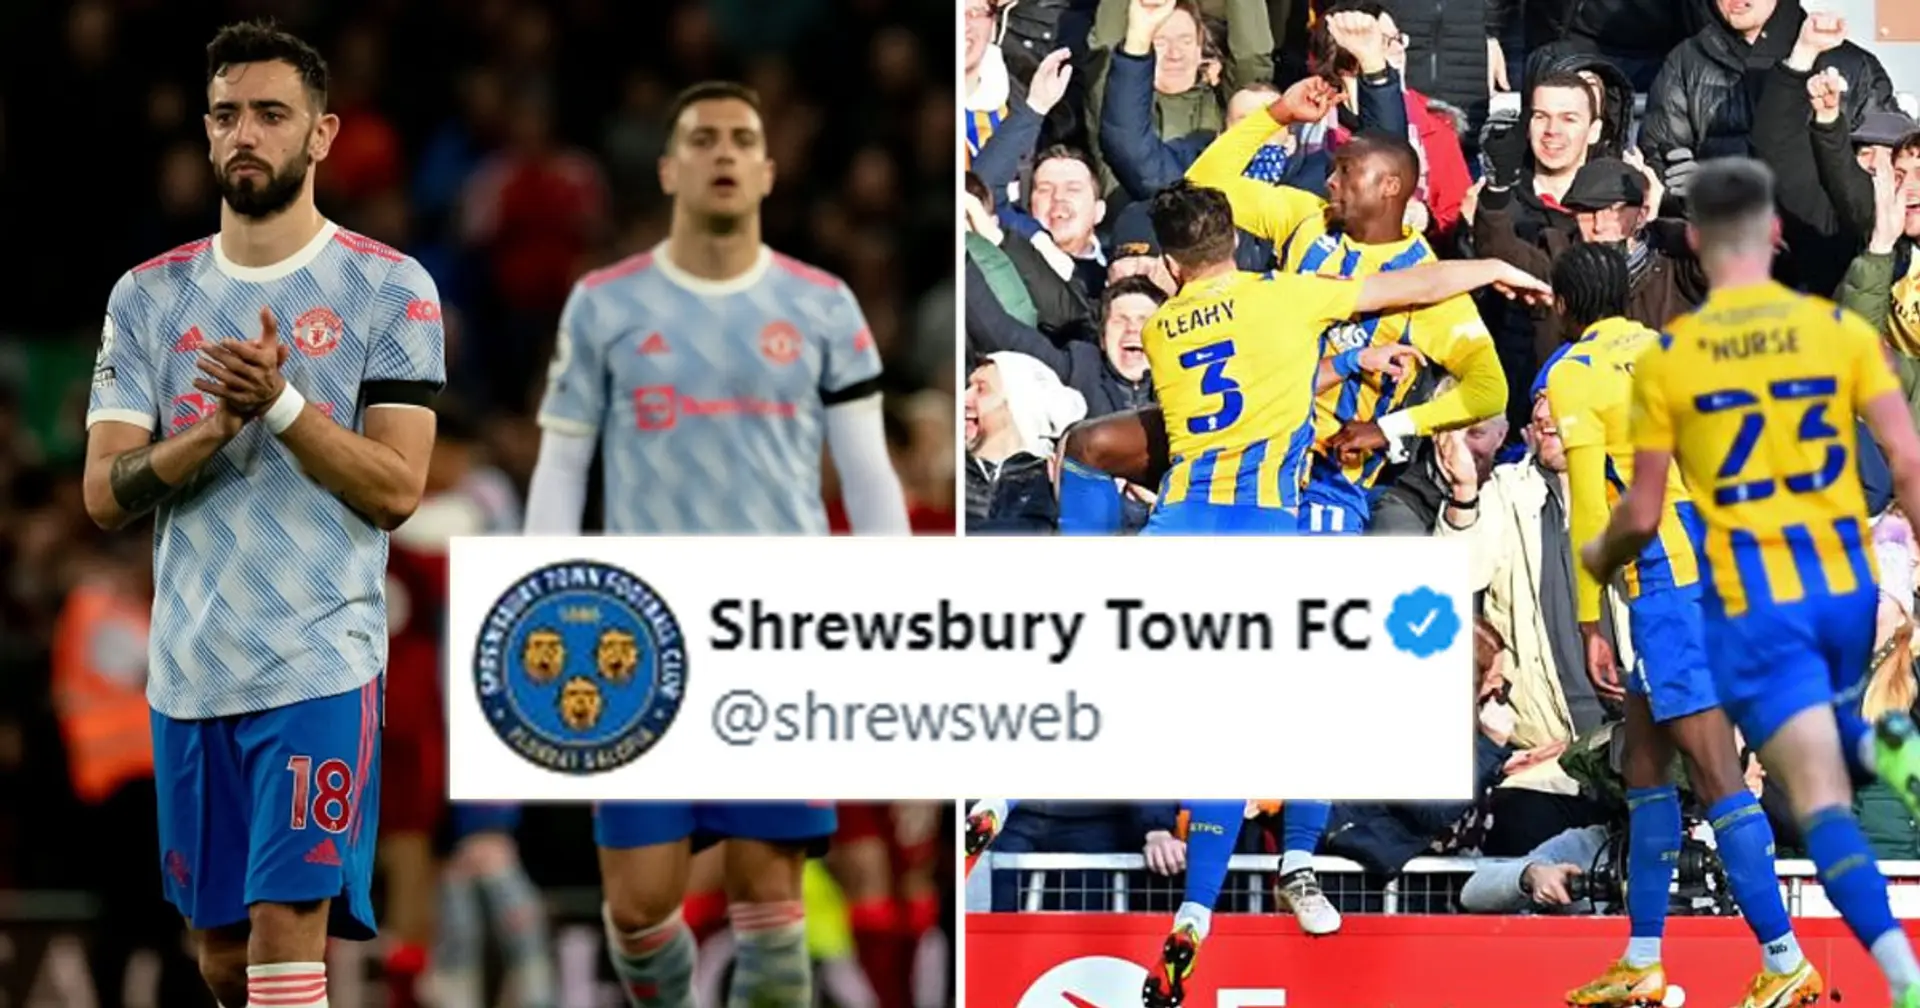 'We scored at Anfield this season': Shrewsbury Town trolls Man United after Liverpool loss